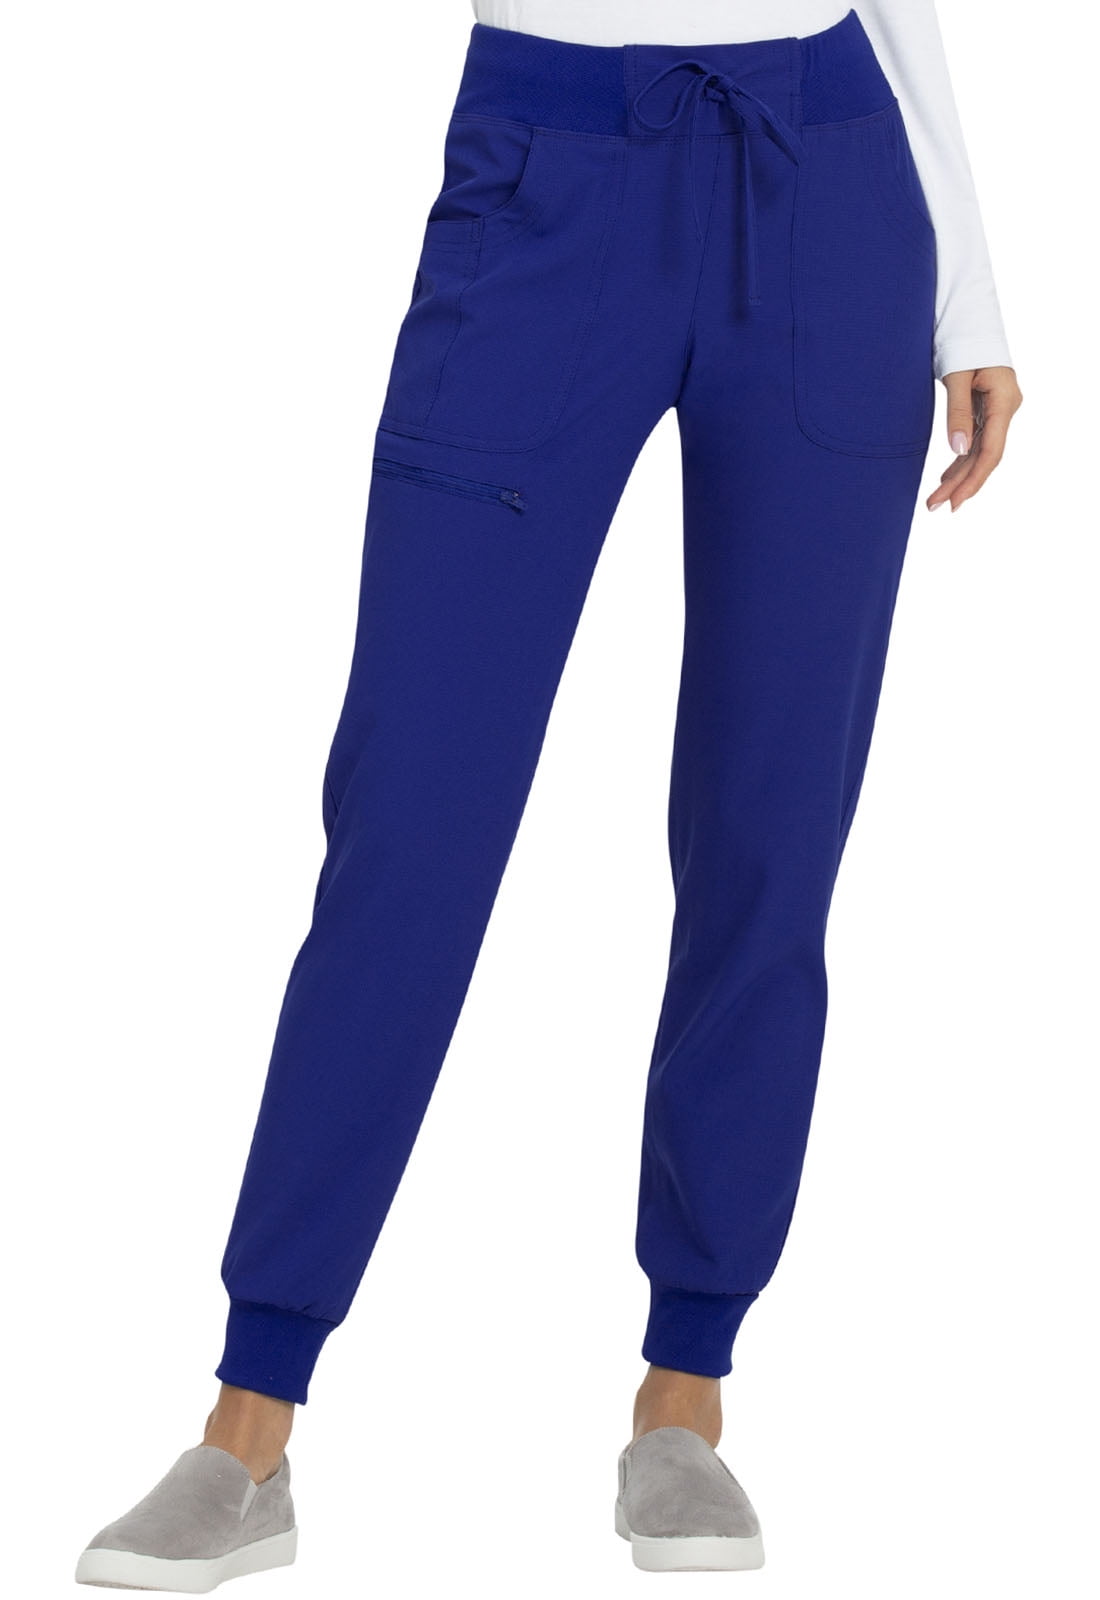 Navy Blue HeartSoul Scrubs Jogger Low Rise Tapered Leg Pants HS030 NAYH 